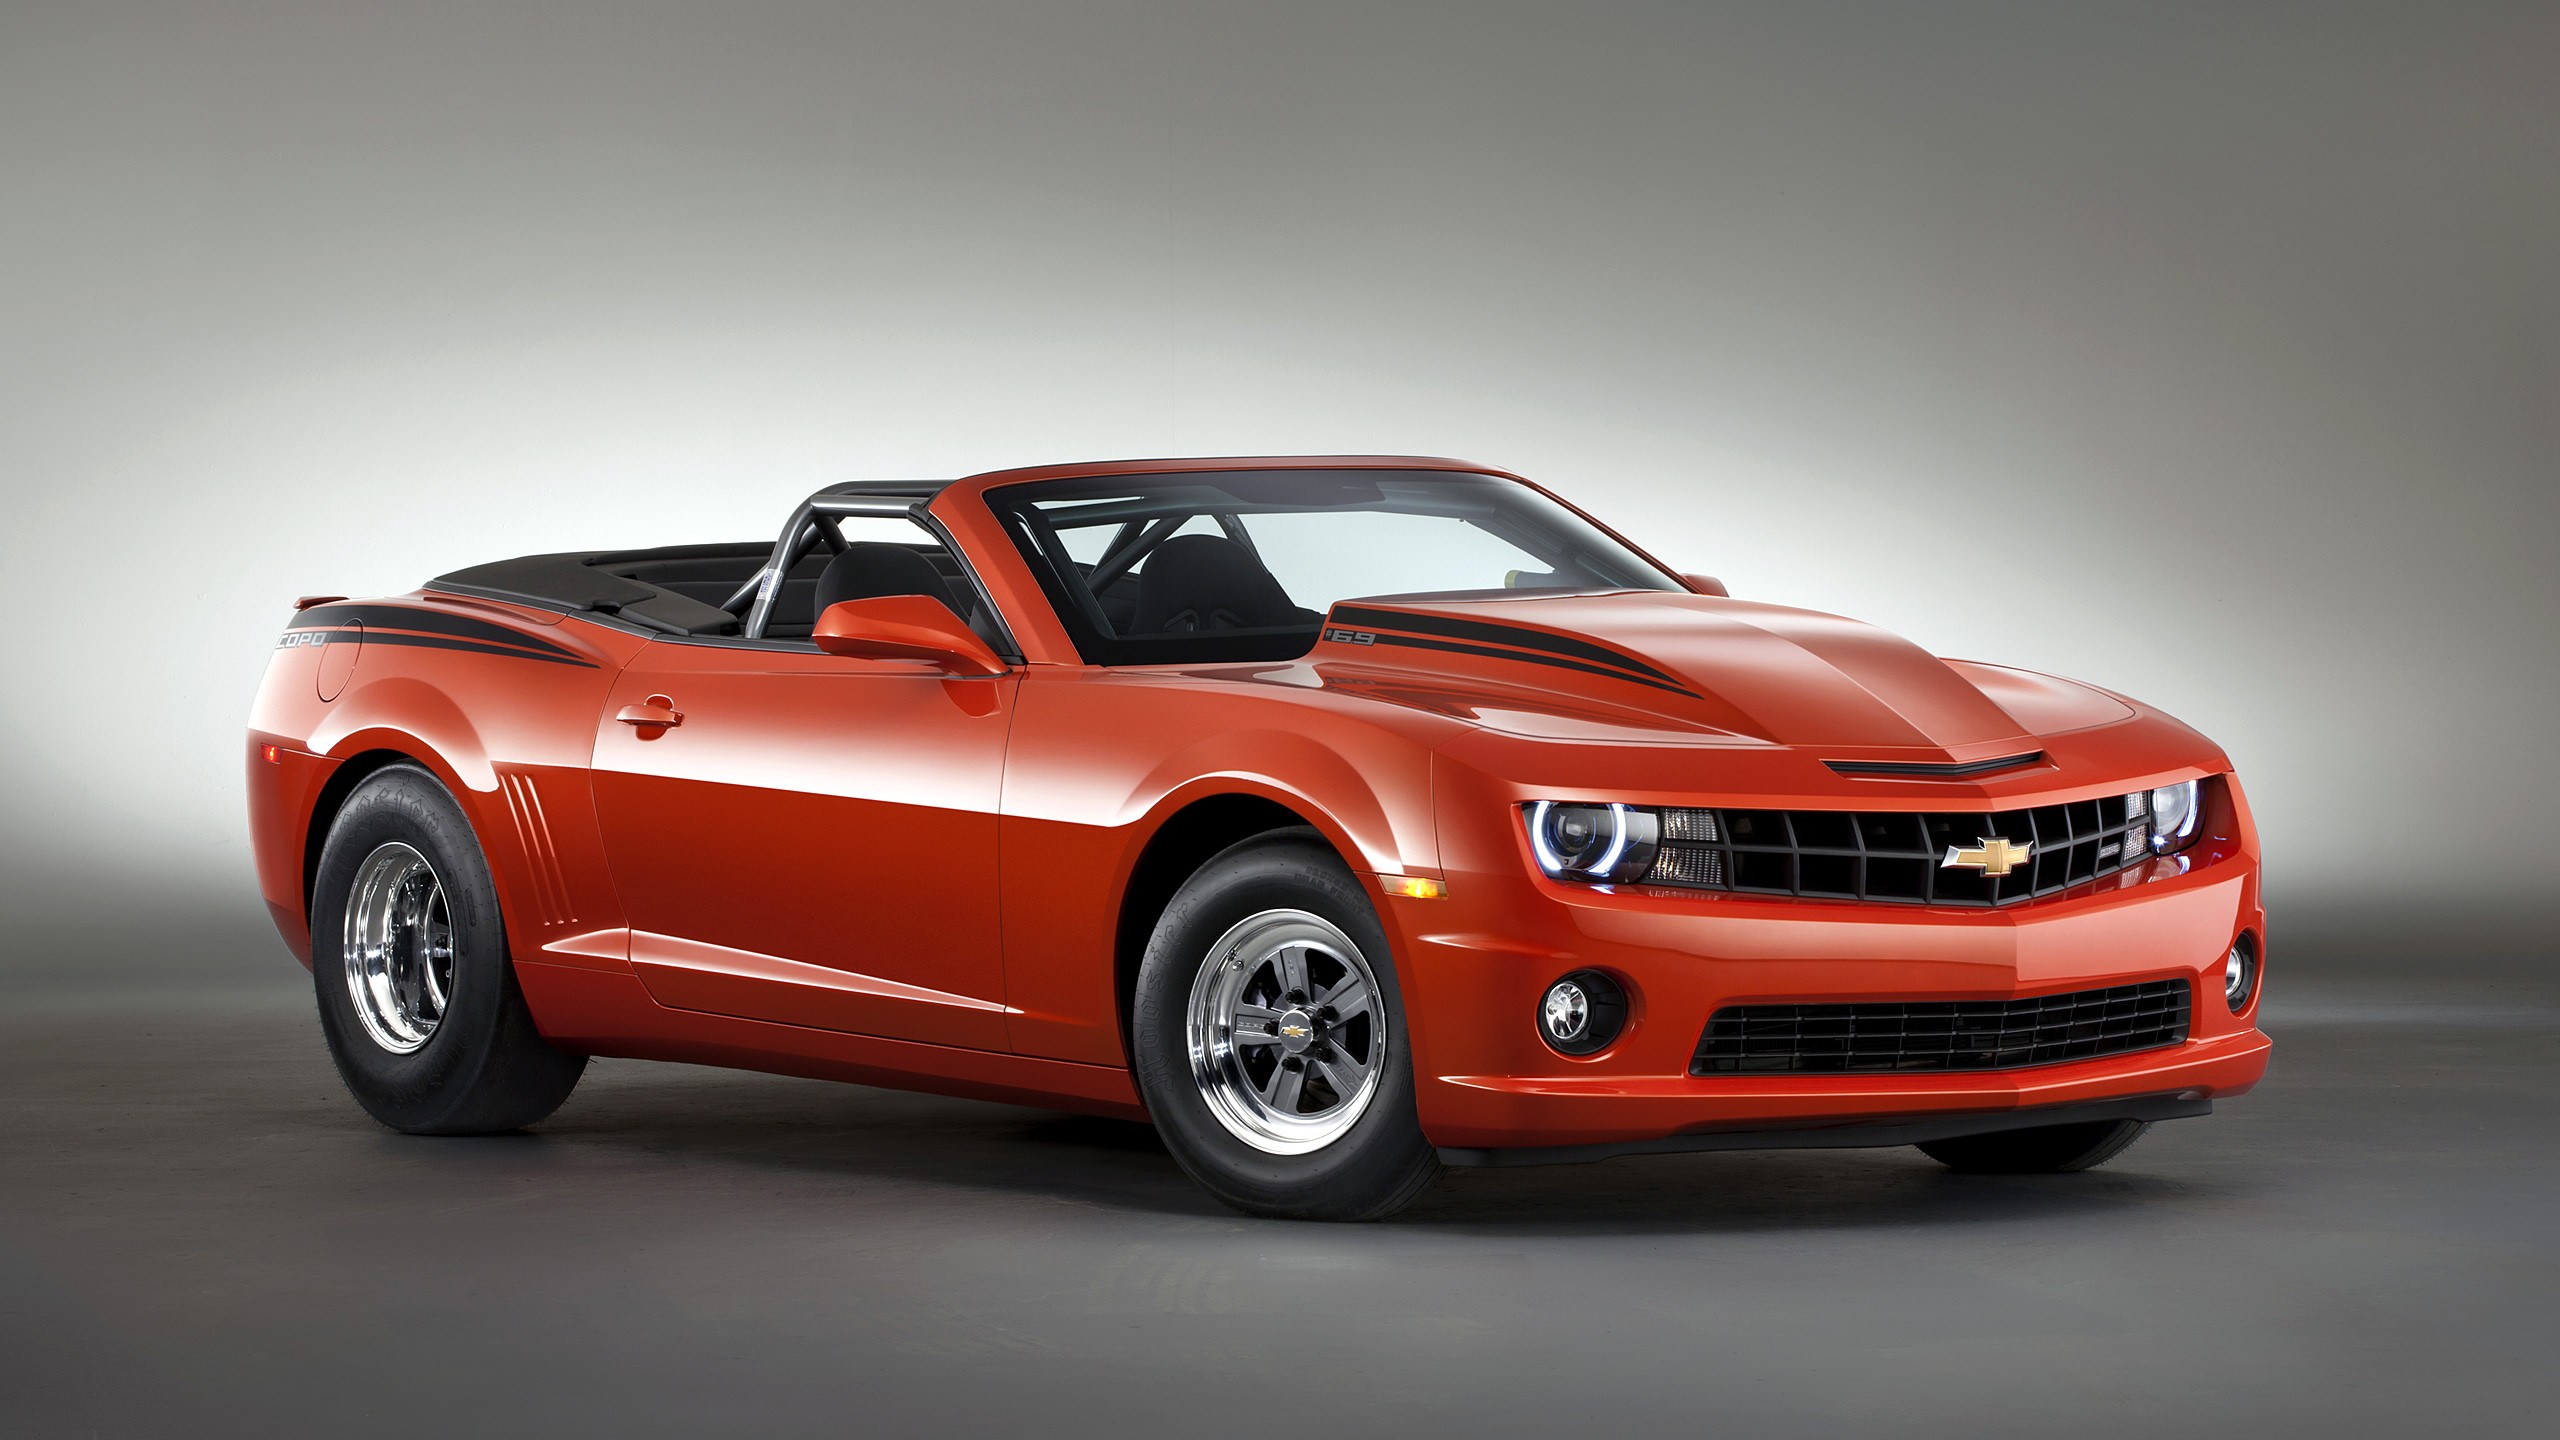 General 2560x1440 car red cars Chevrolet Camaro vehicle Chevrolet muscle cars American cars convertible